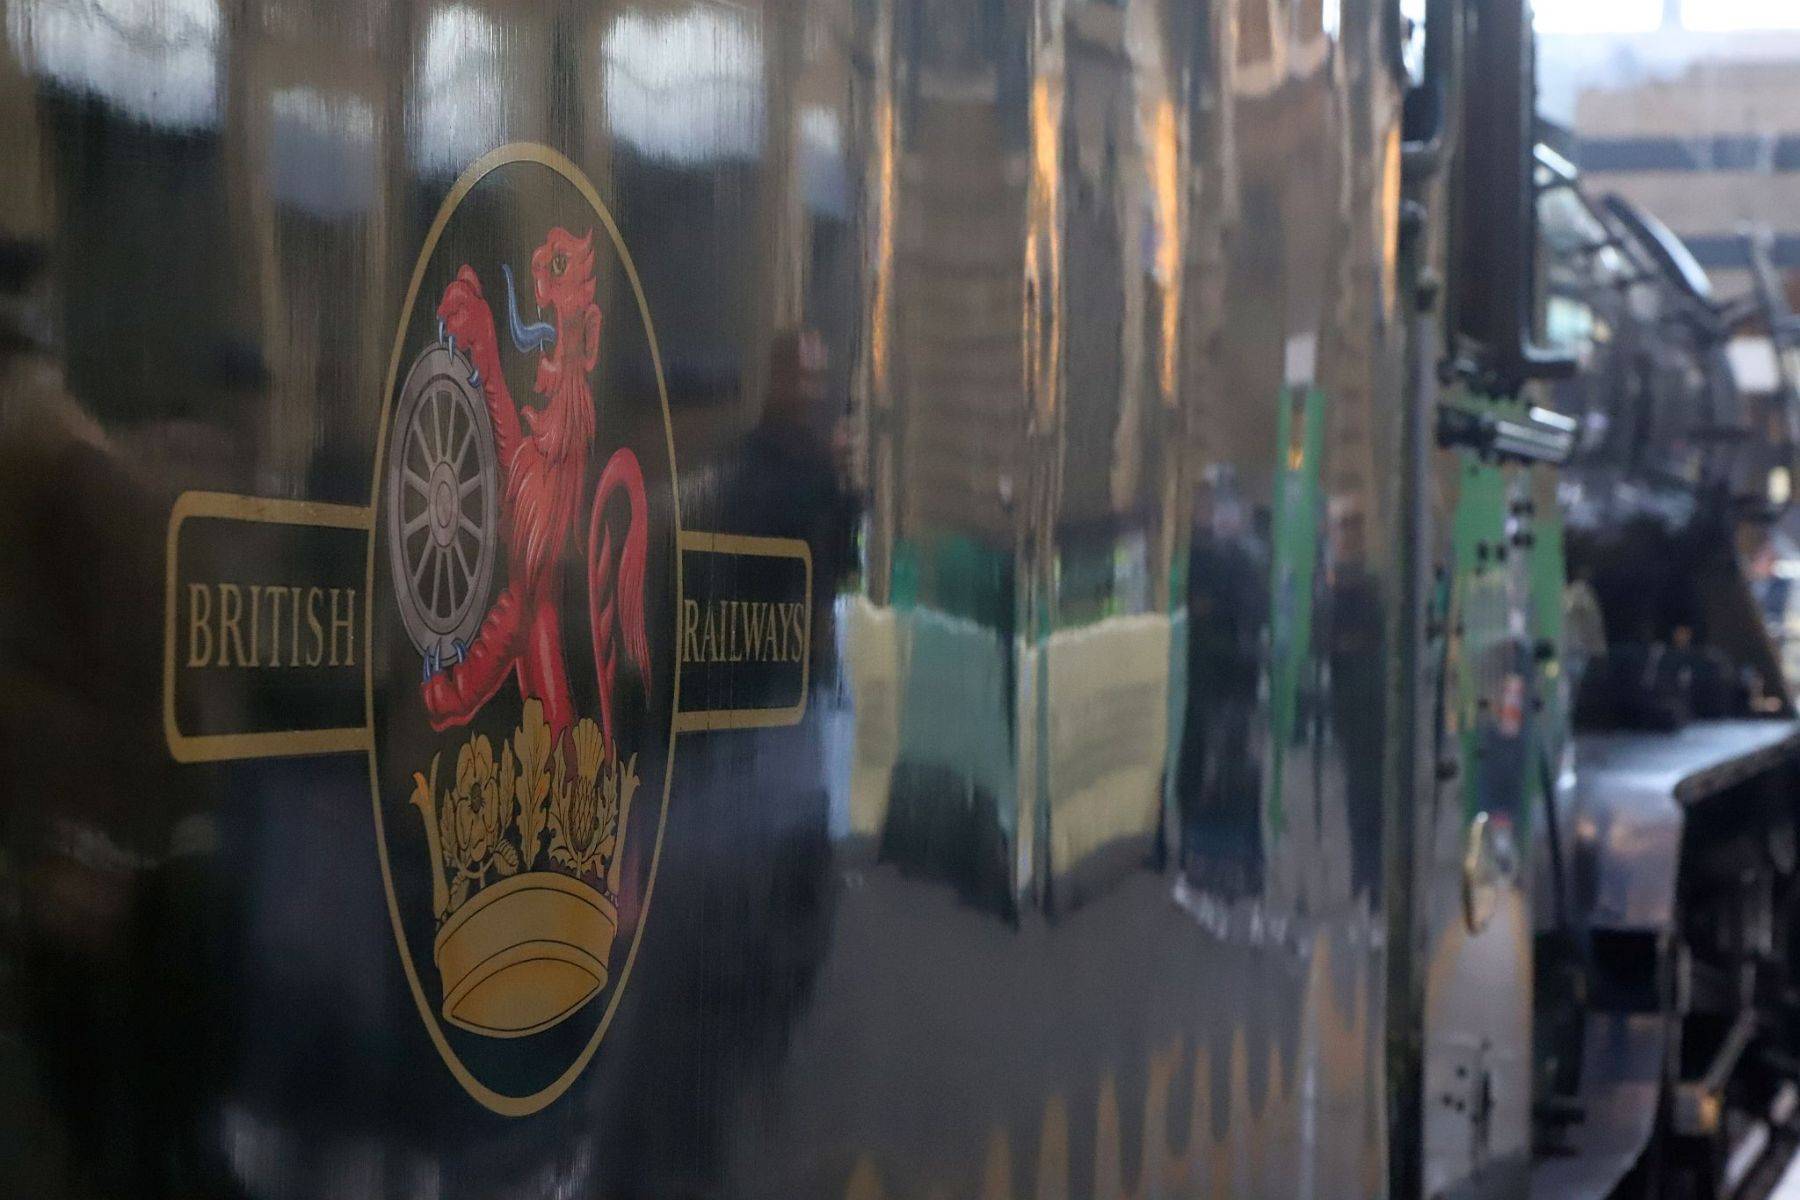 The British Railways lion and wheel badge logo on the tender of steam engine Flying Scotsman. Flying Scotsman steam locomotive at King's Cross railway station platform 8 for the 170th anniversary of the station's opening and the start of Flying Scotsman's 100th birthday celebrations